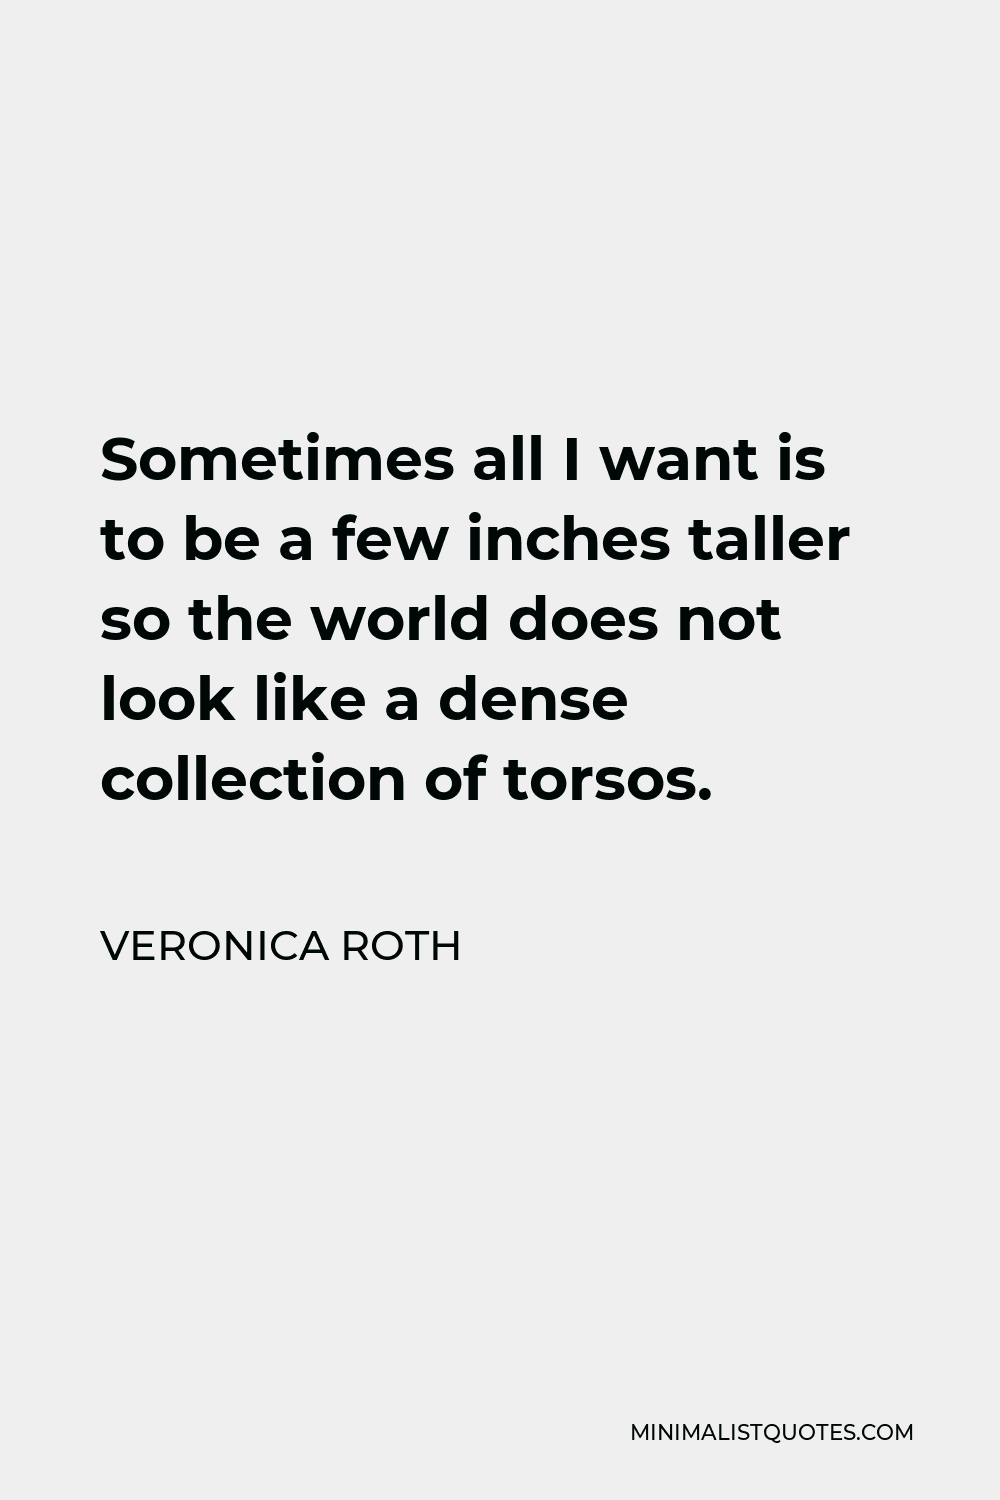 Veronica Roth Quote - Sometimes all I want is to be a few inches taller so the world does not look like a dense collection of torsos.